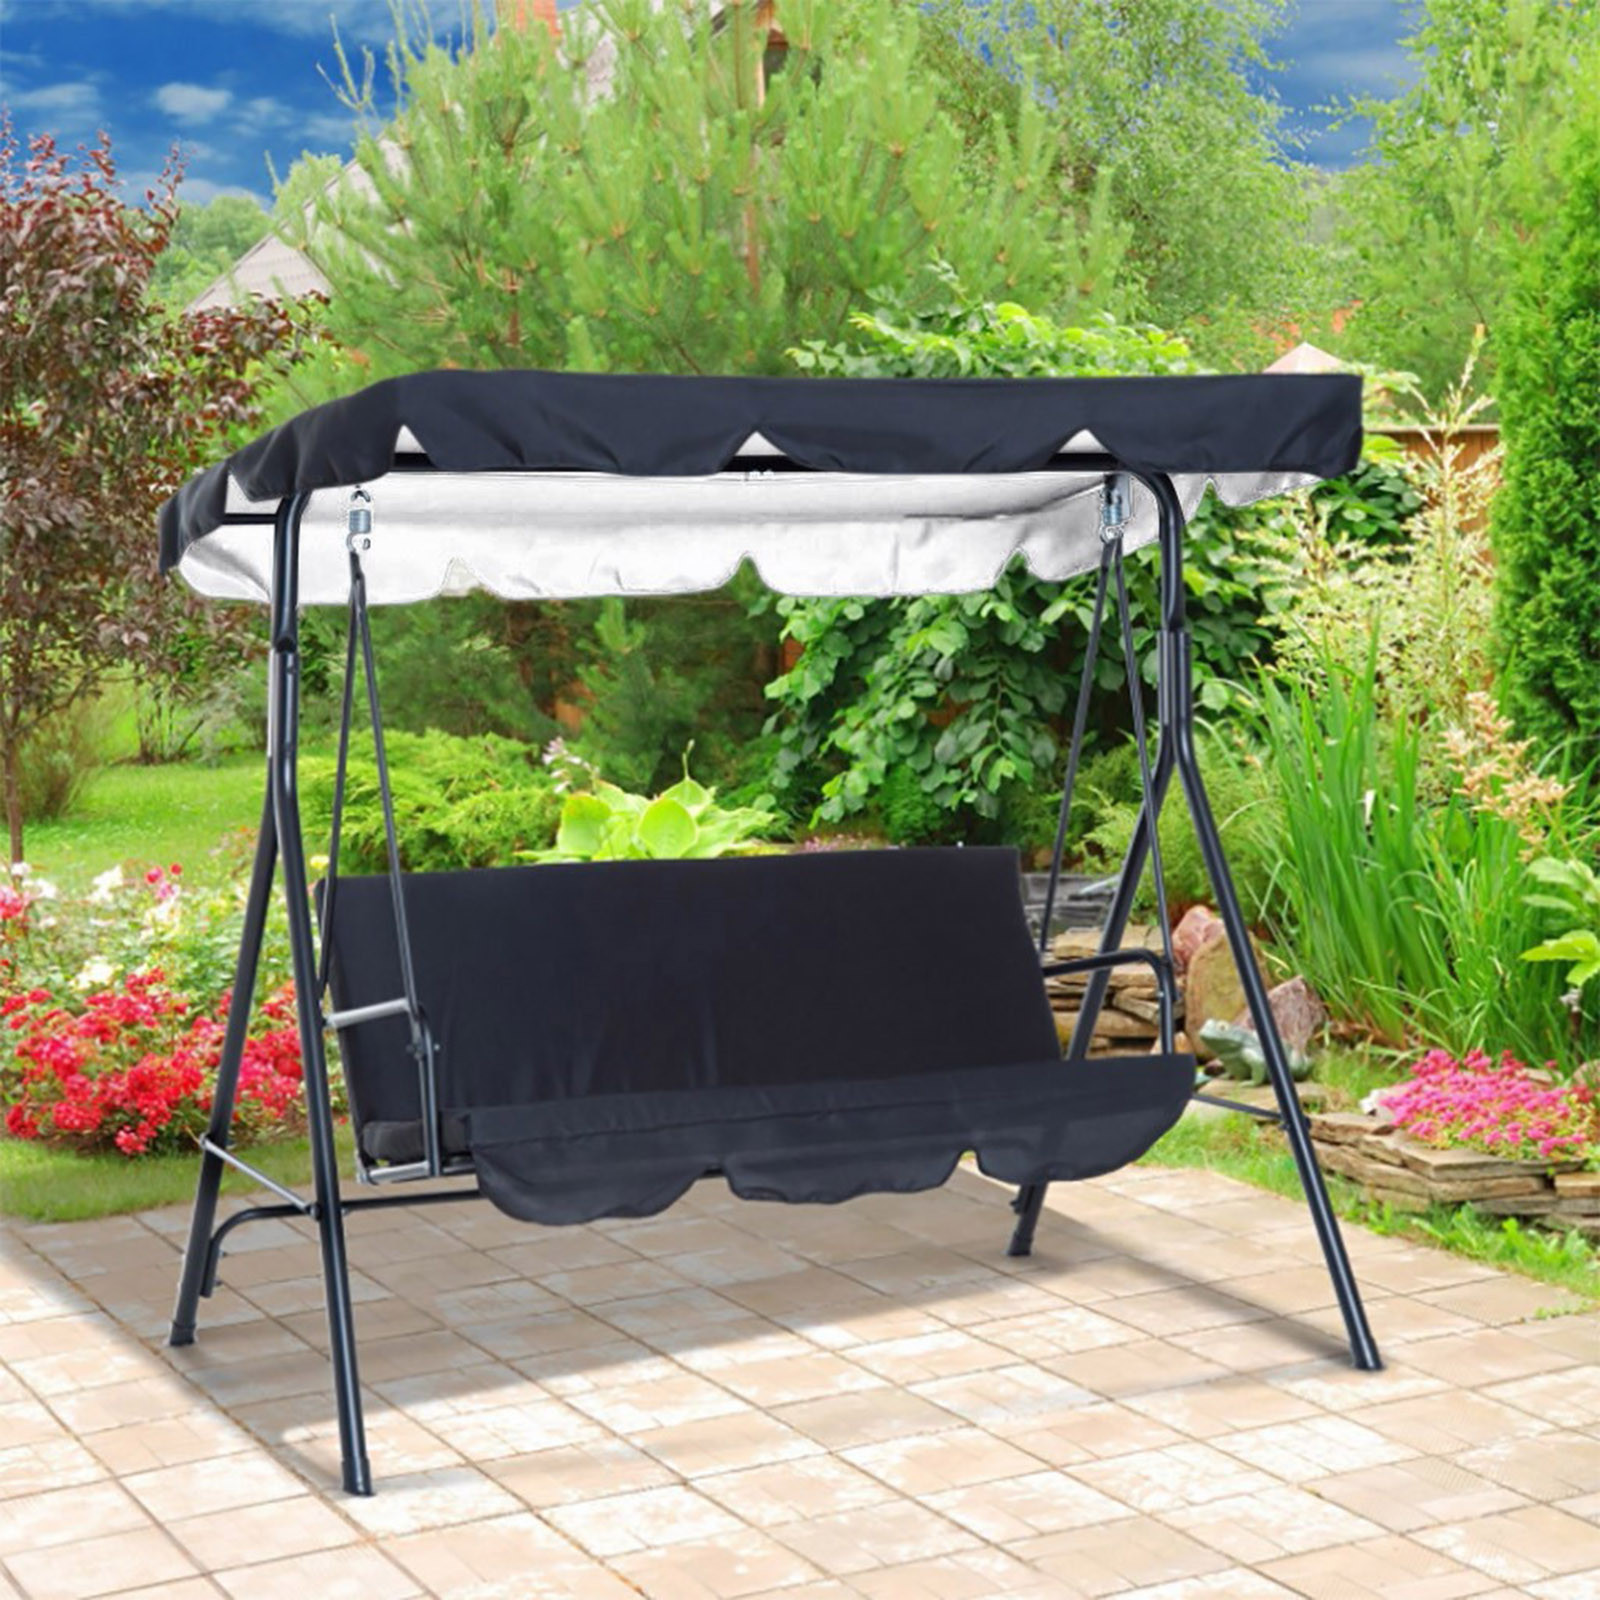 Toyfunny Outdoor Swing Cushion 3 Seater Swing Chair Cushion Waterproof Swing Seat Pads - image 3 of 3